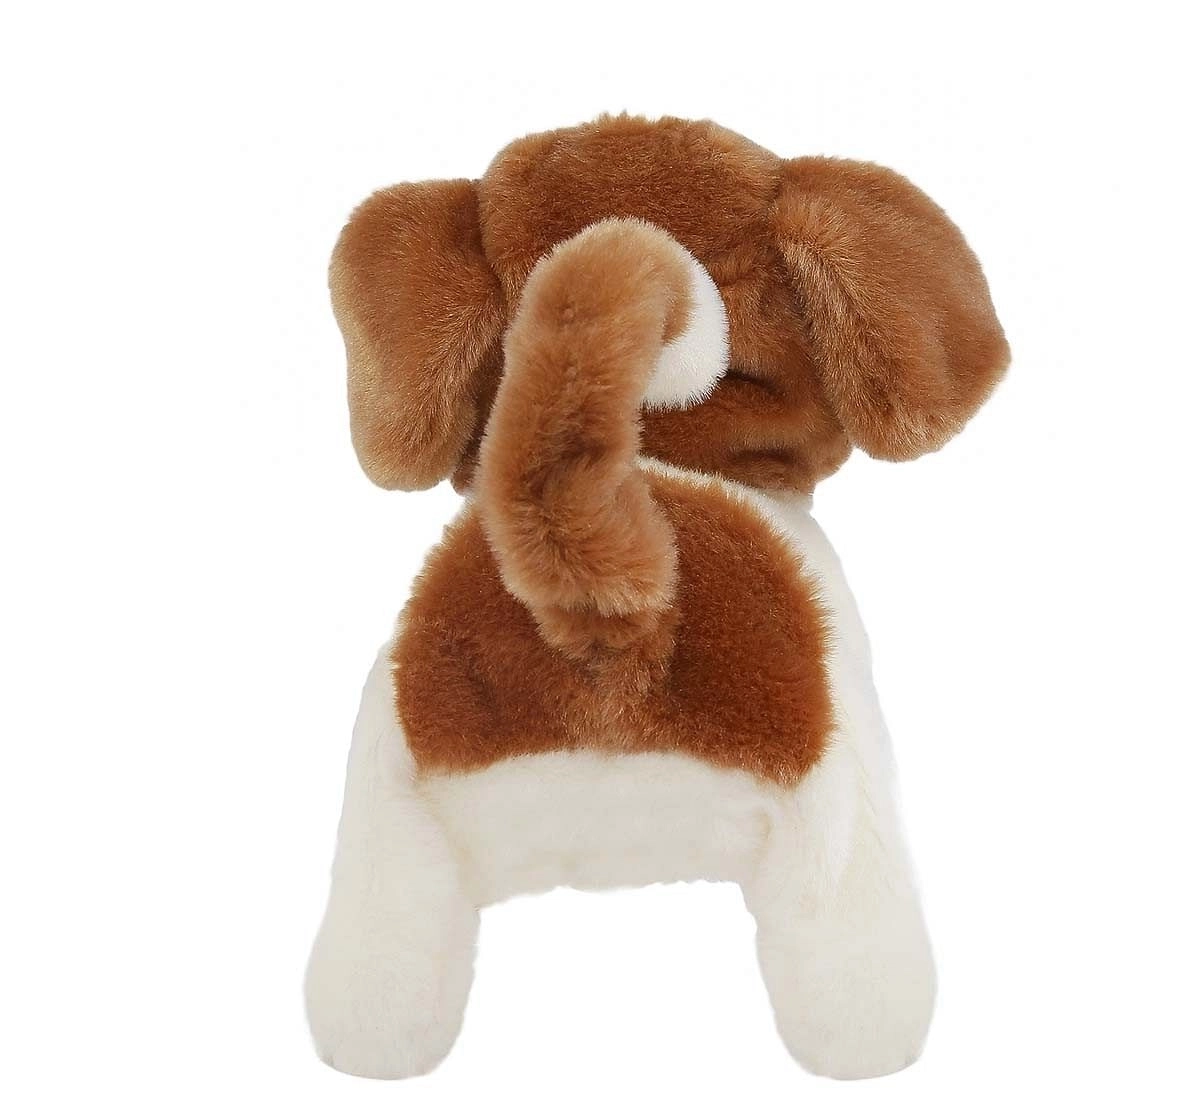 Rowan Movers & Shakers Baby Jack Russell Plush Soft Dog Interactive Toys for Kids age 3Y+ - 13.4 Cm 